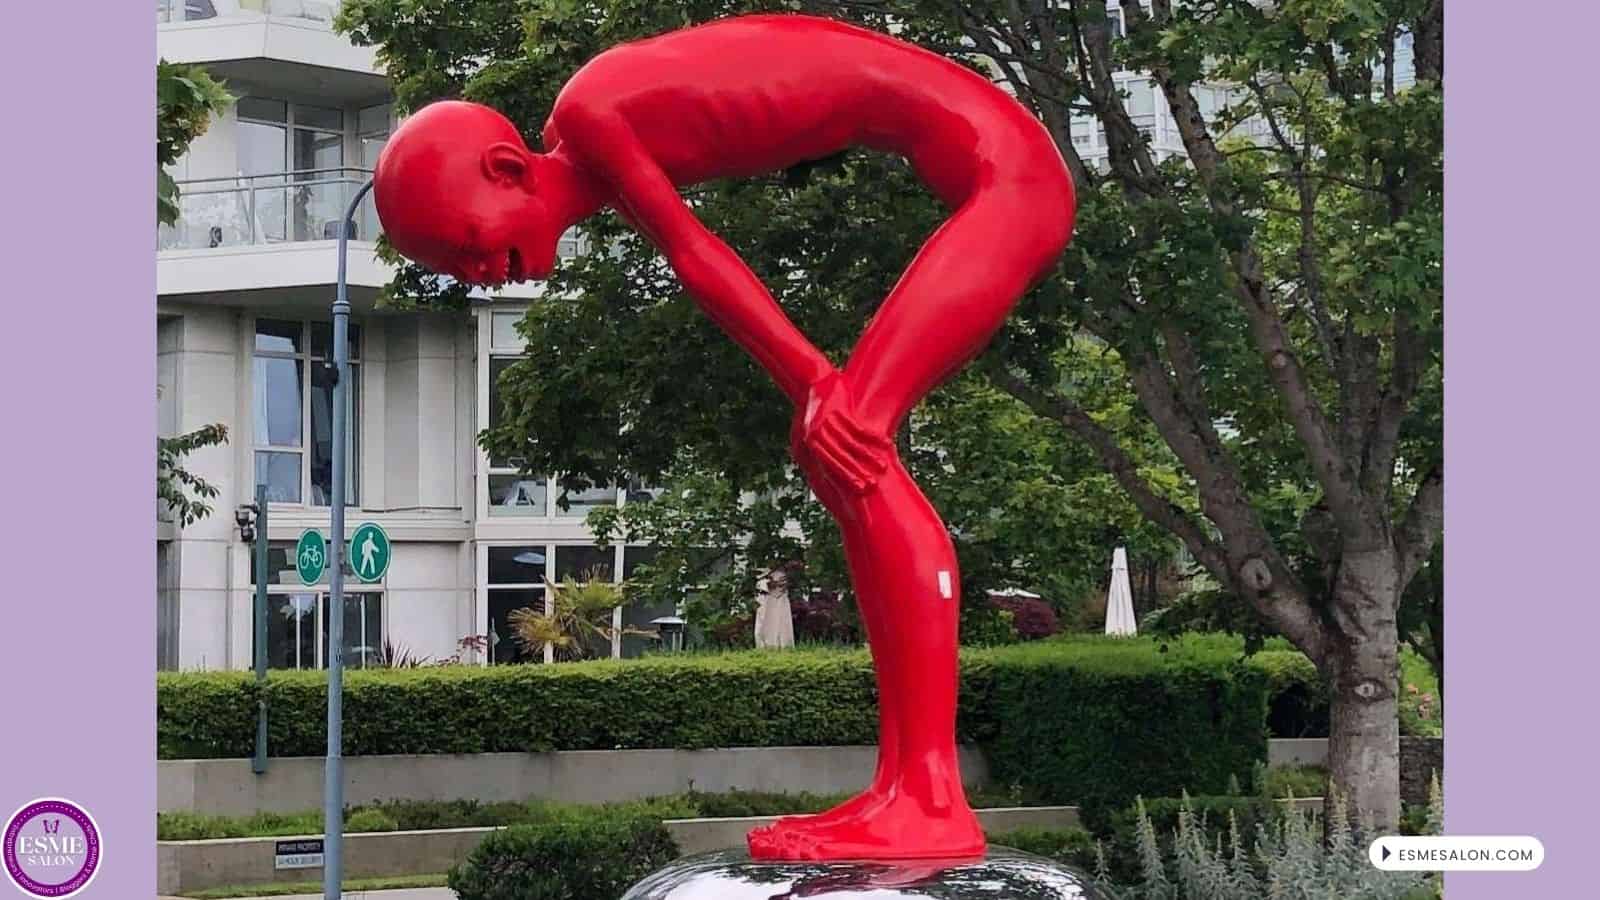 an image of a red statue: The cheeky expression and arresting pose are a celebratory call to the audiences, inviting them to embrace their inner child.